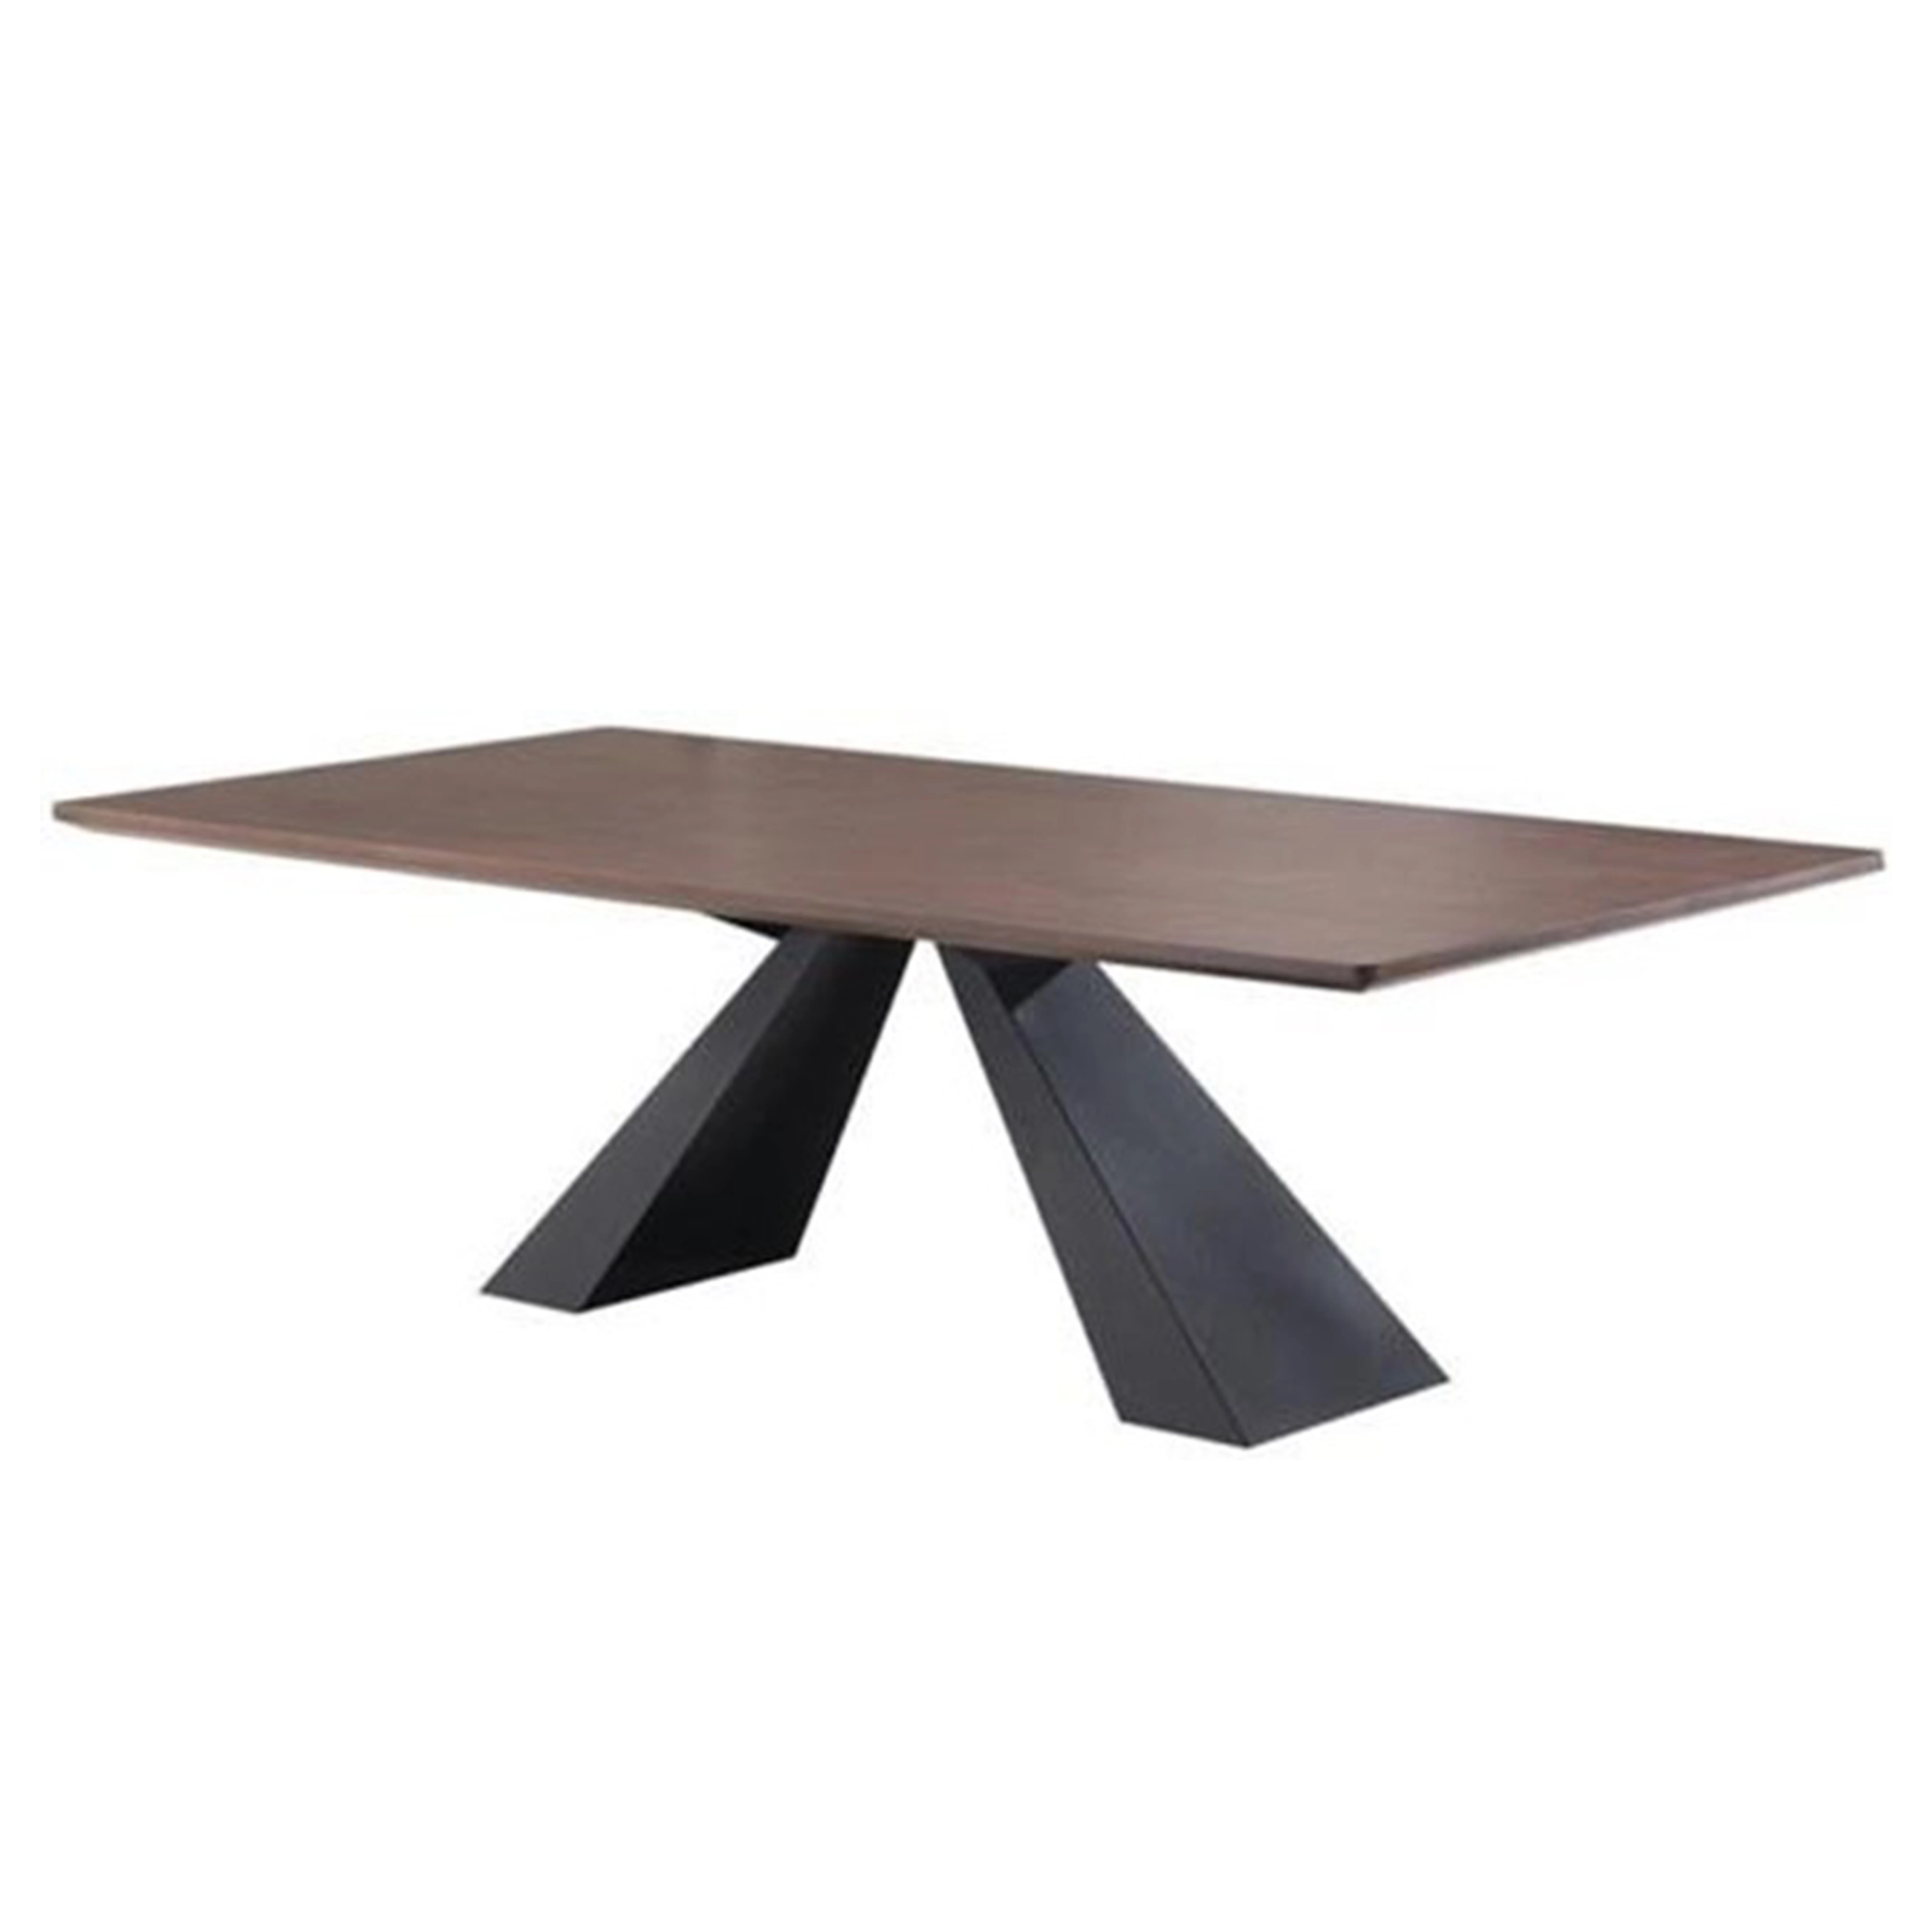 Modern Wood and Steel dining table for up to 8 persons V Steel Legs Teak Wood Industrial furniture